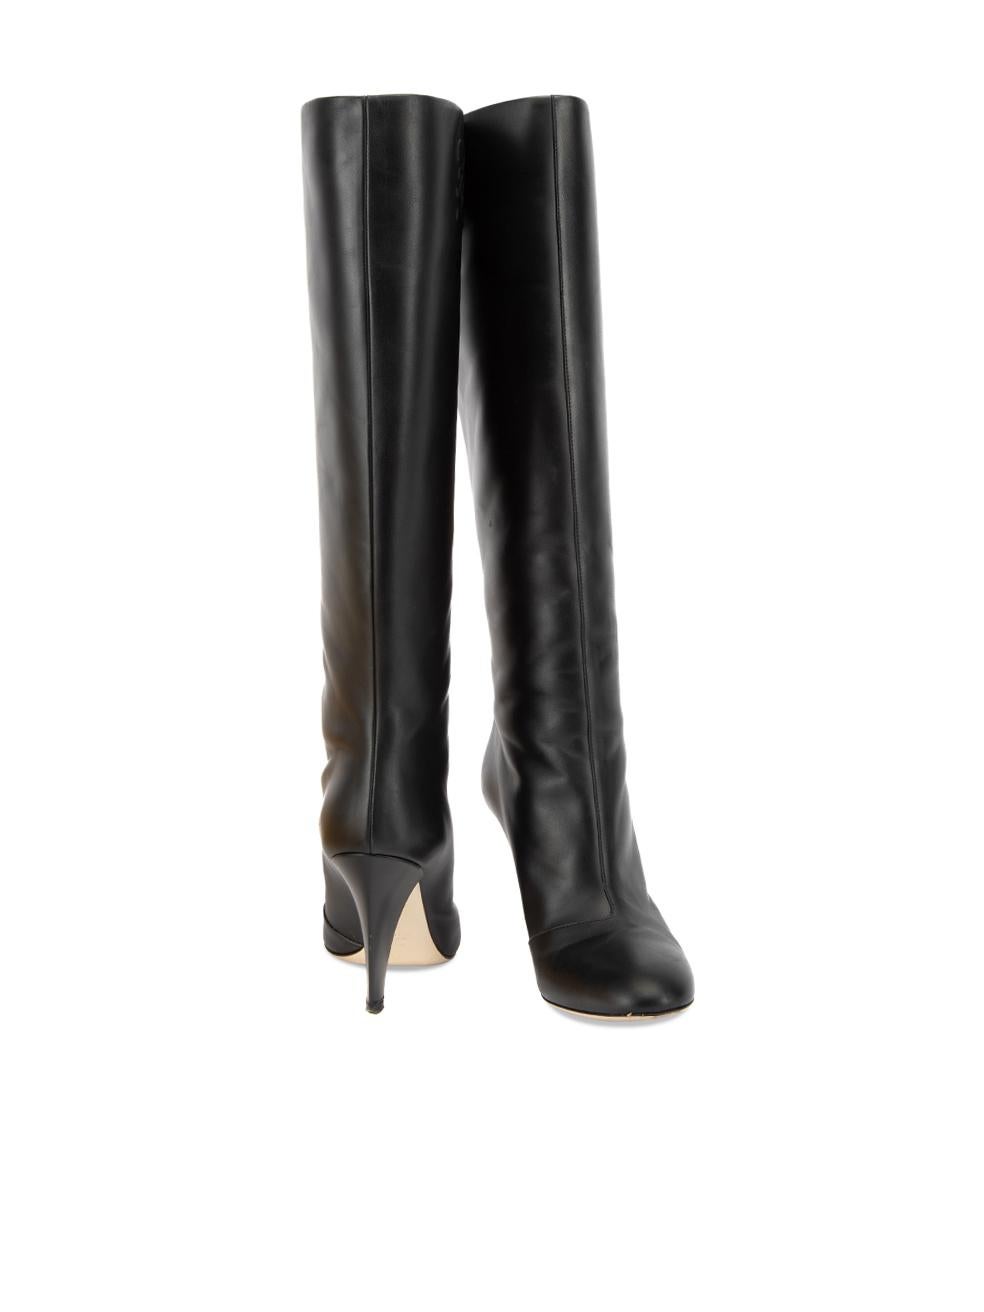 Fendi Women's Black Leather Karligraphy Knee High Boots In Excellent Condition In London, GB